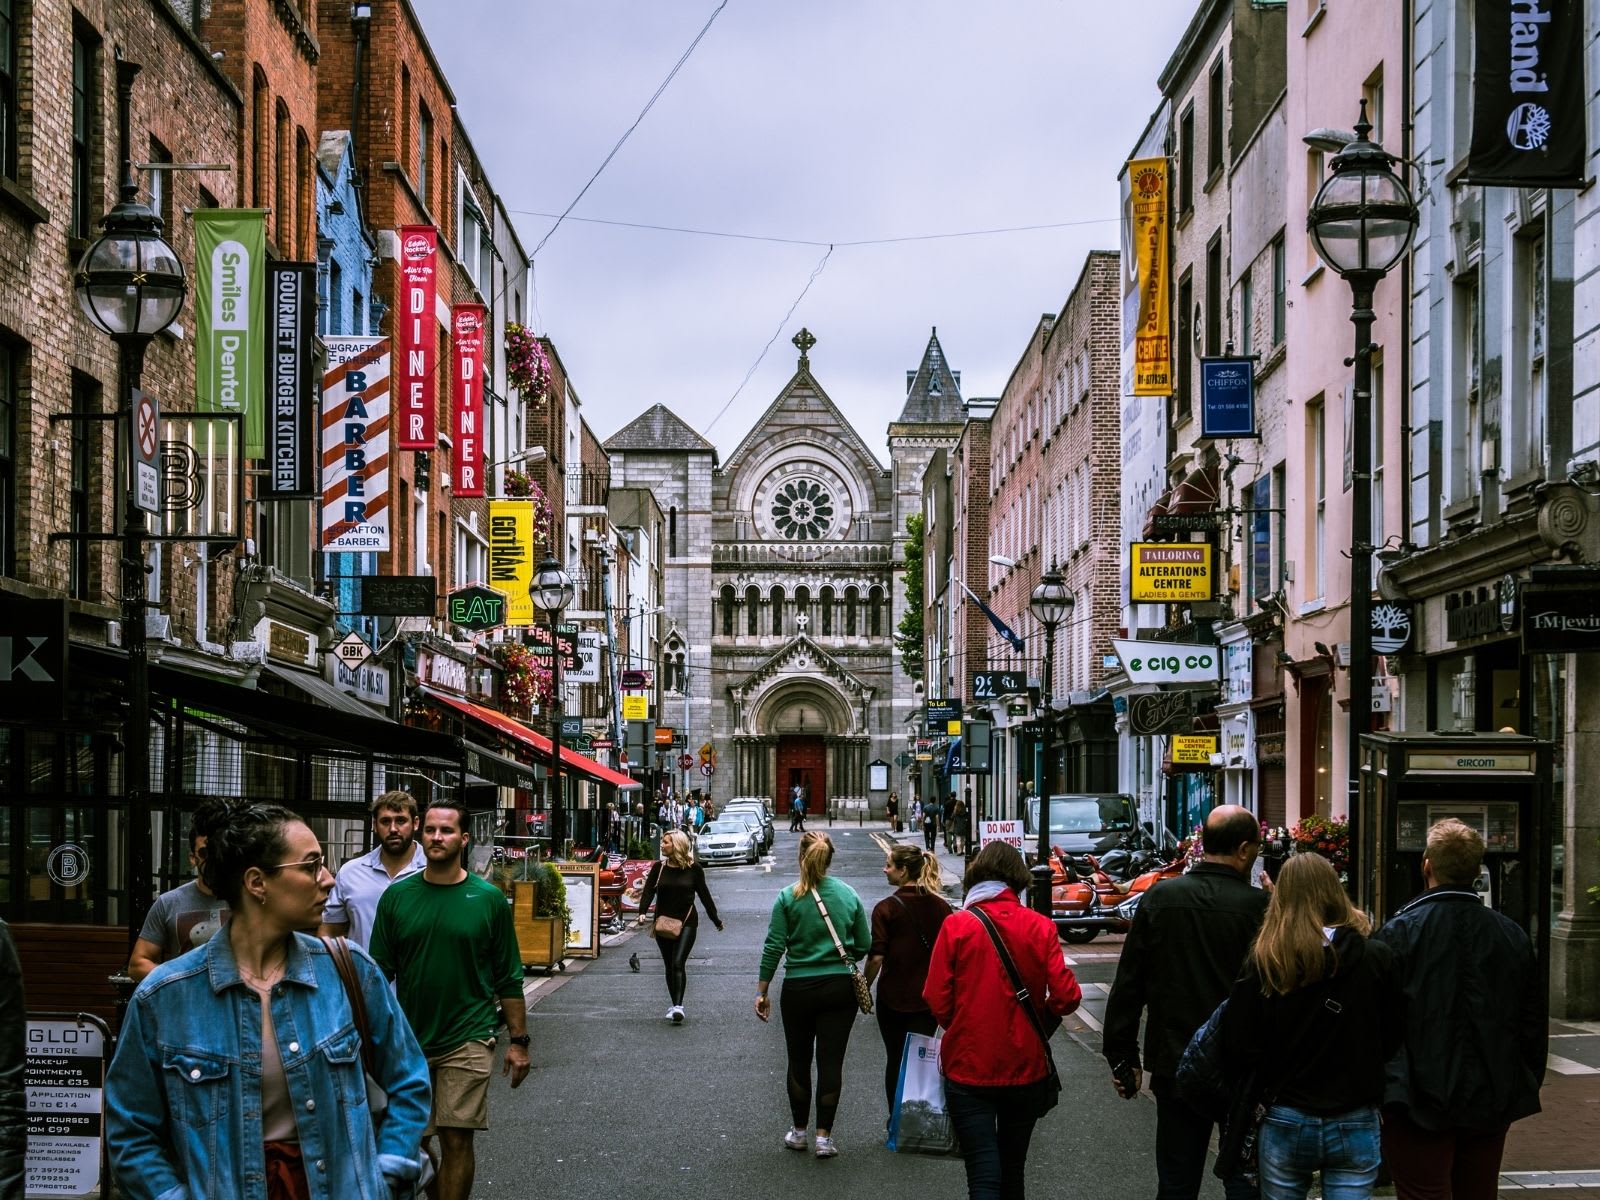 People walking the streets of Dublin